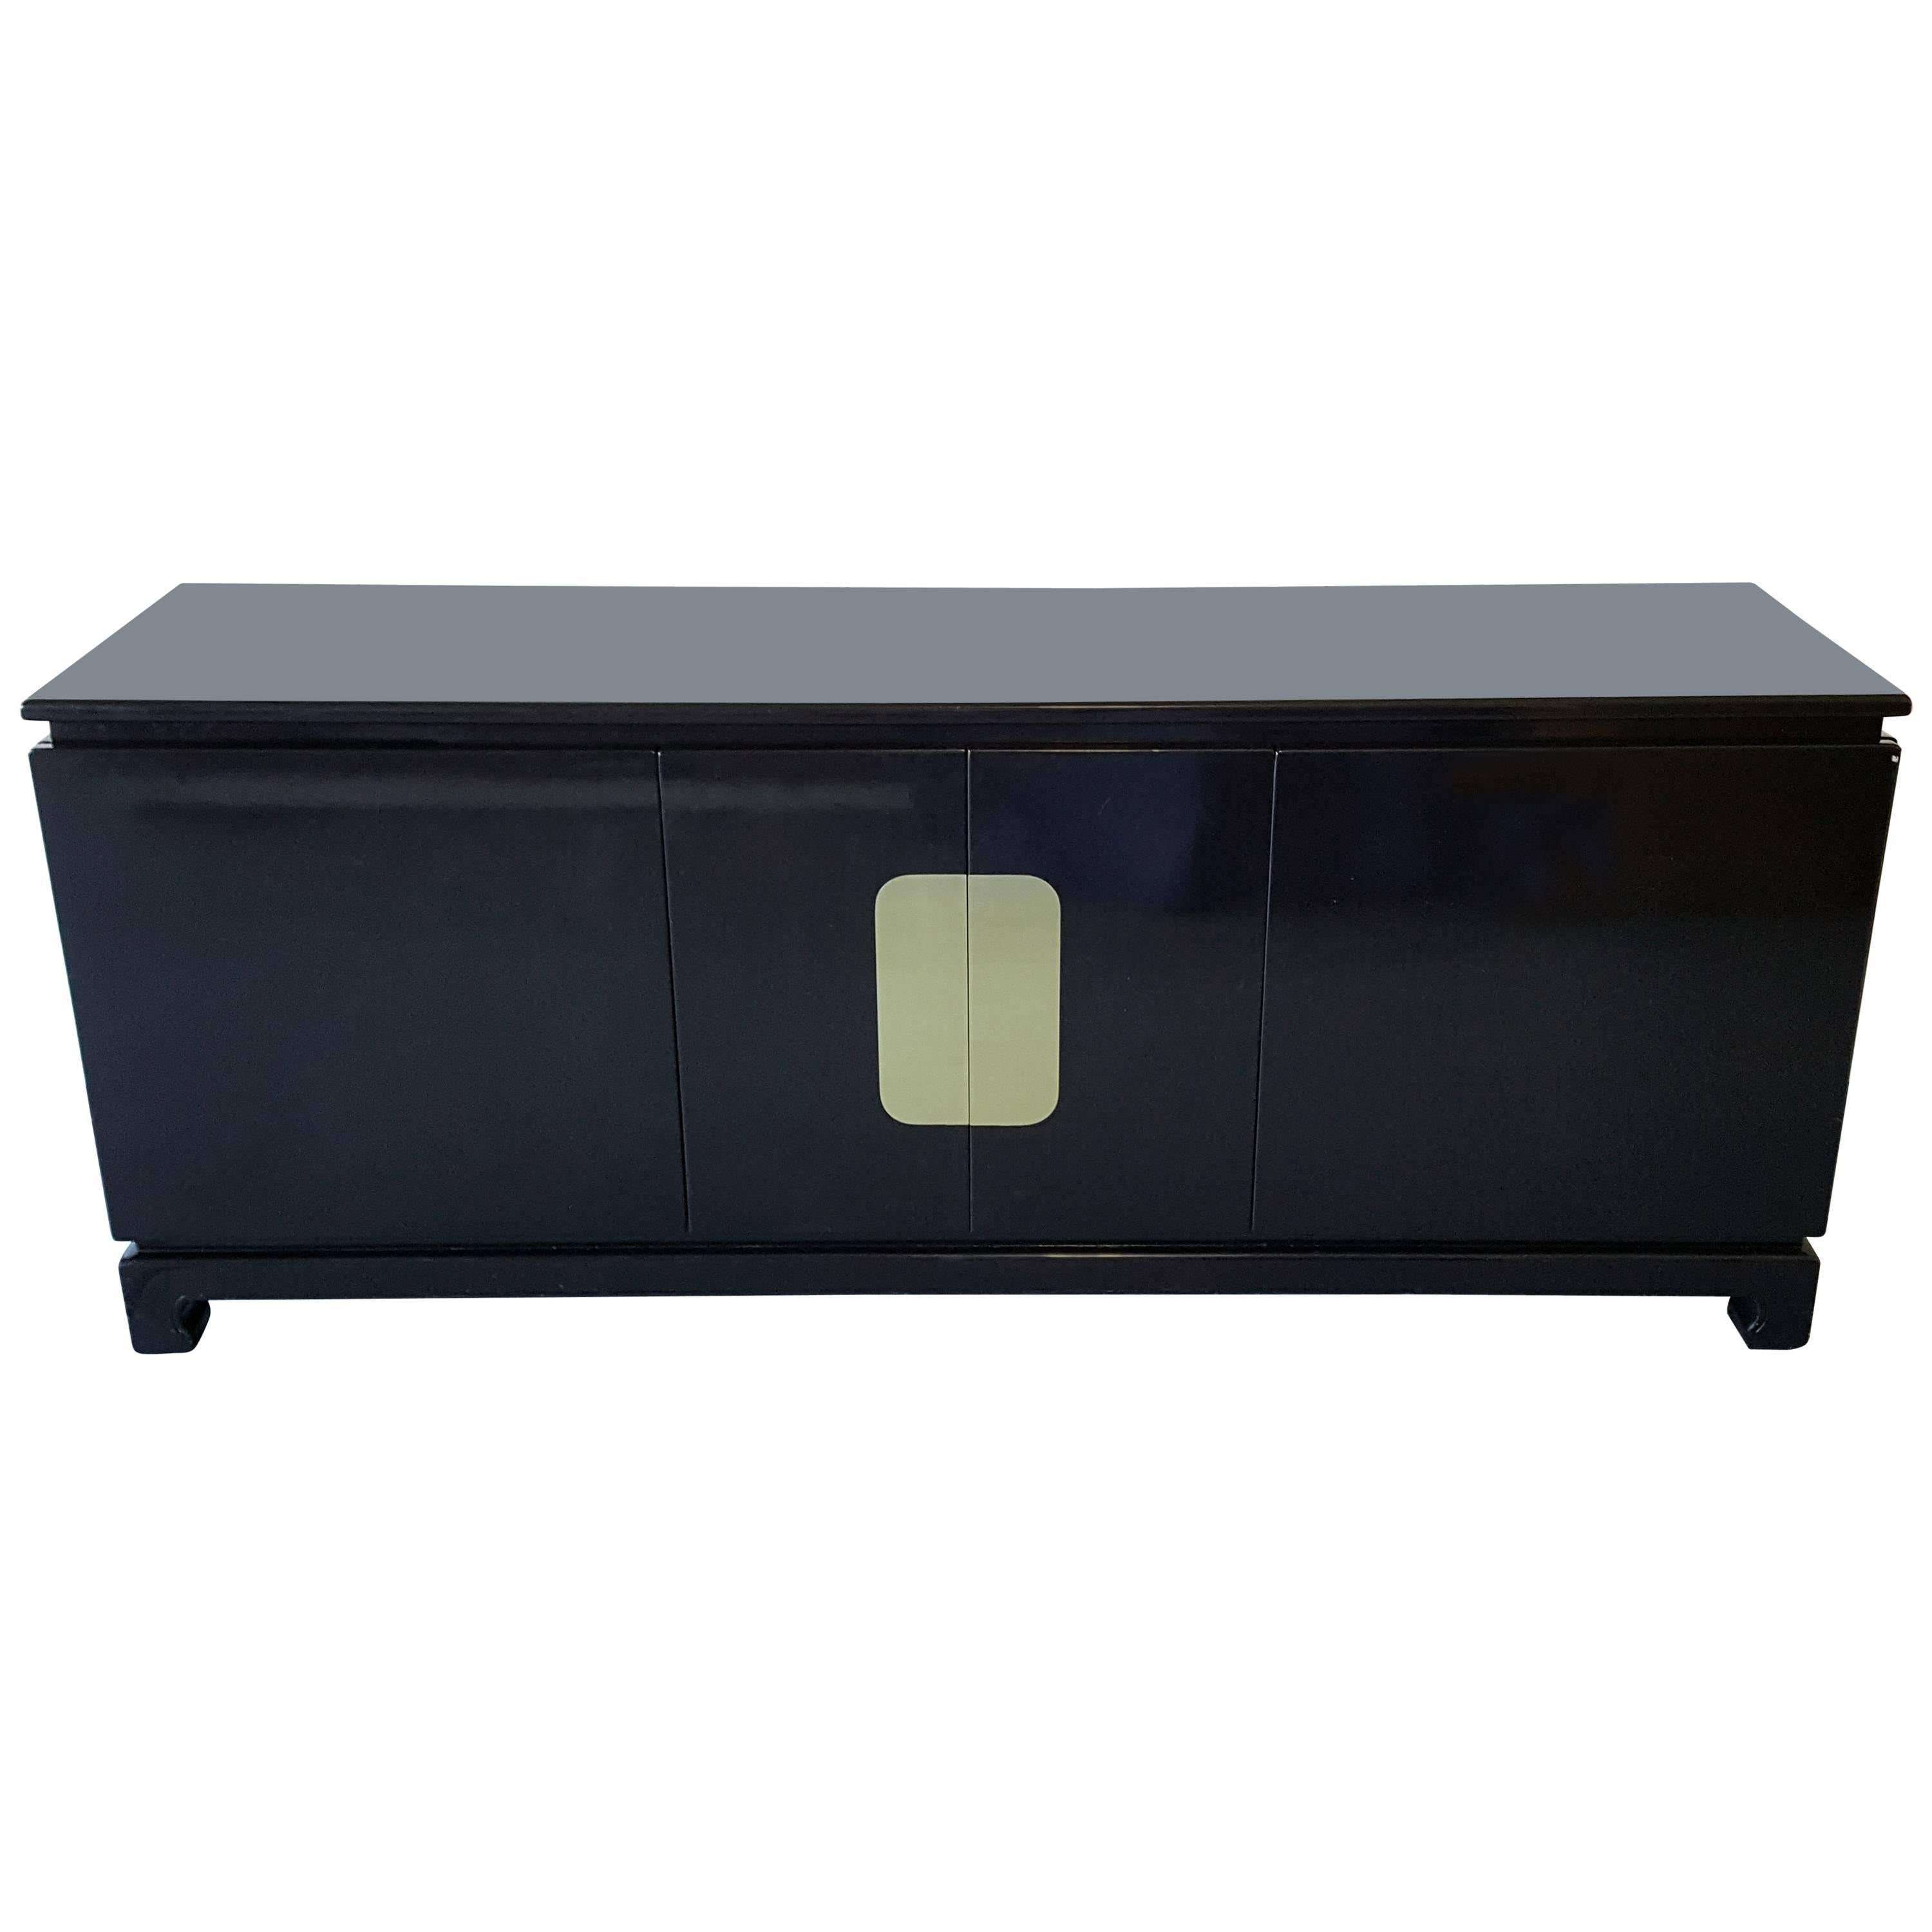 1970s Black Lacquer and Brass Credenza in the Style of James Mont